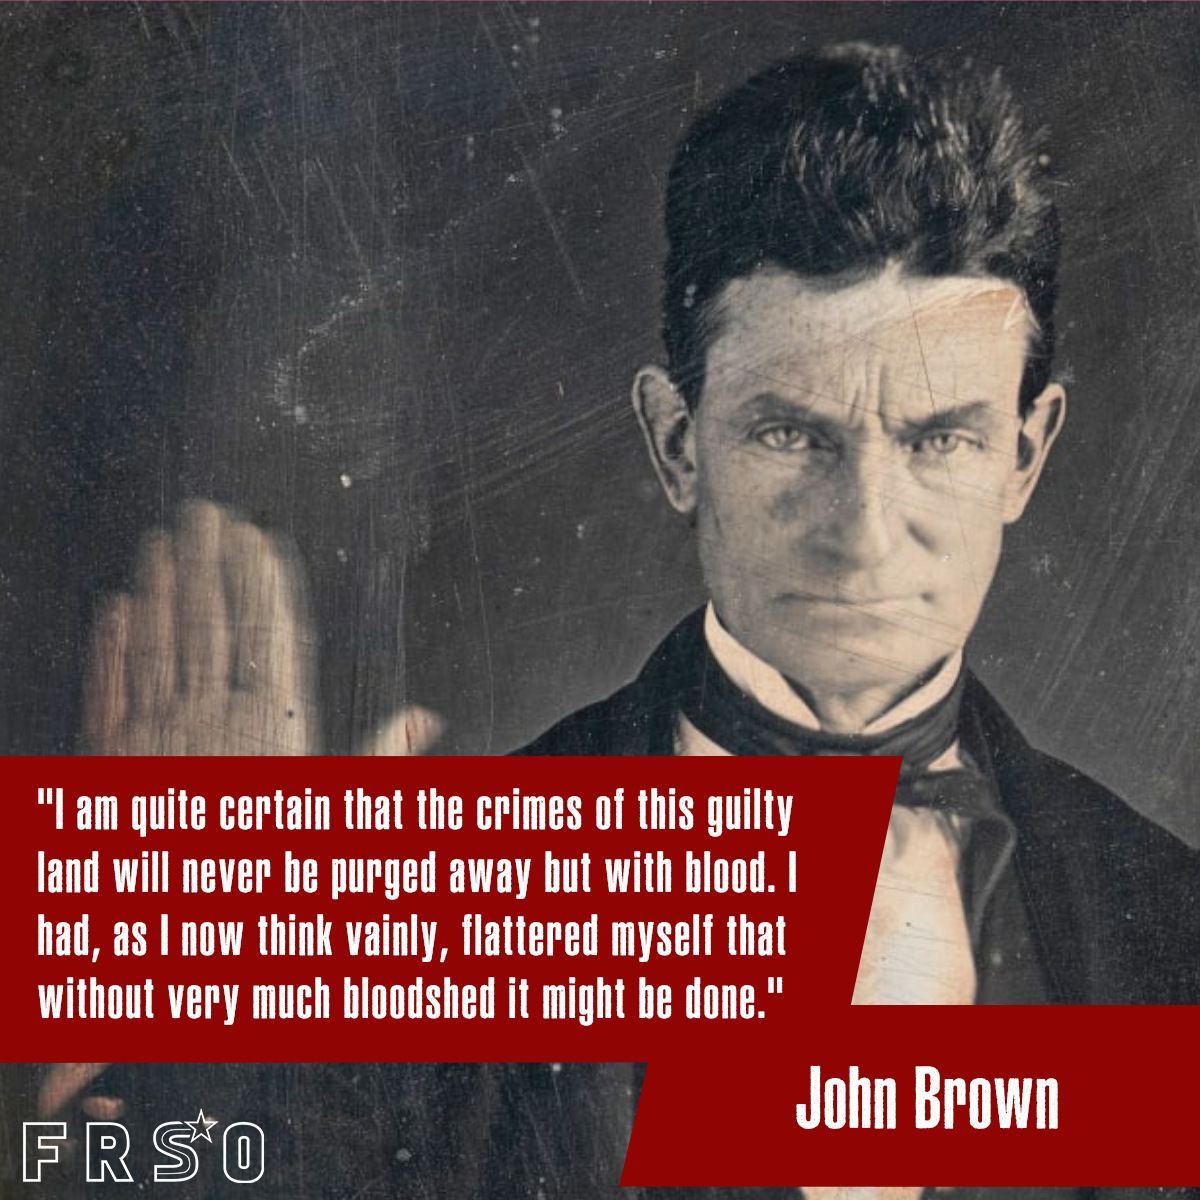 #OnThisDay 05/09/1800: John Brown was born. He was an #abolitionist who came to believe that #slavery would never be ended in the US through purely peaceful means. He formed an army of black & white people dedicated to ending slavery by any means necessary.